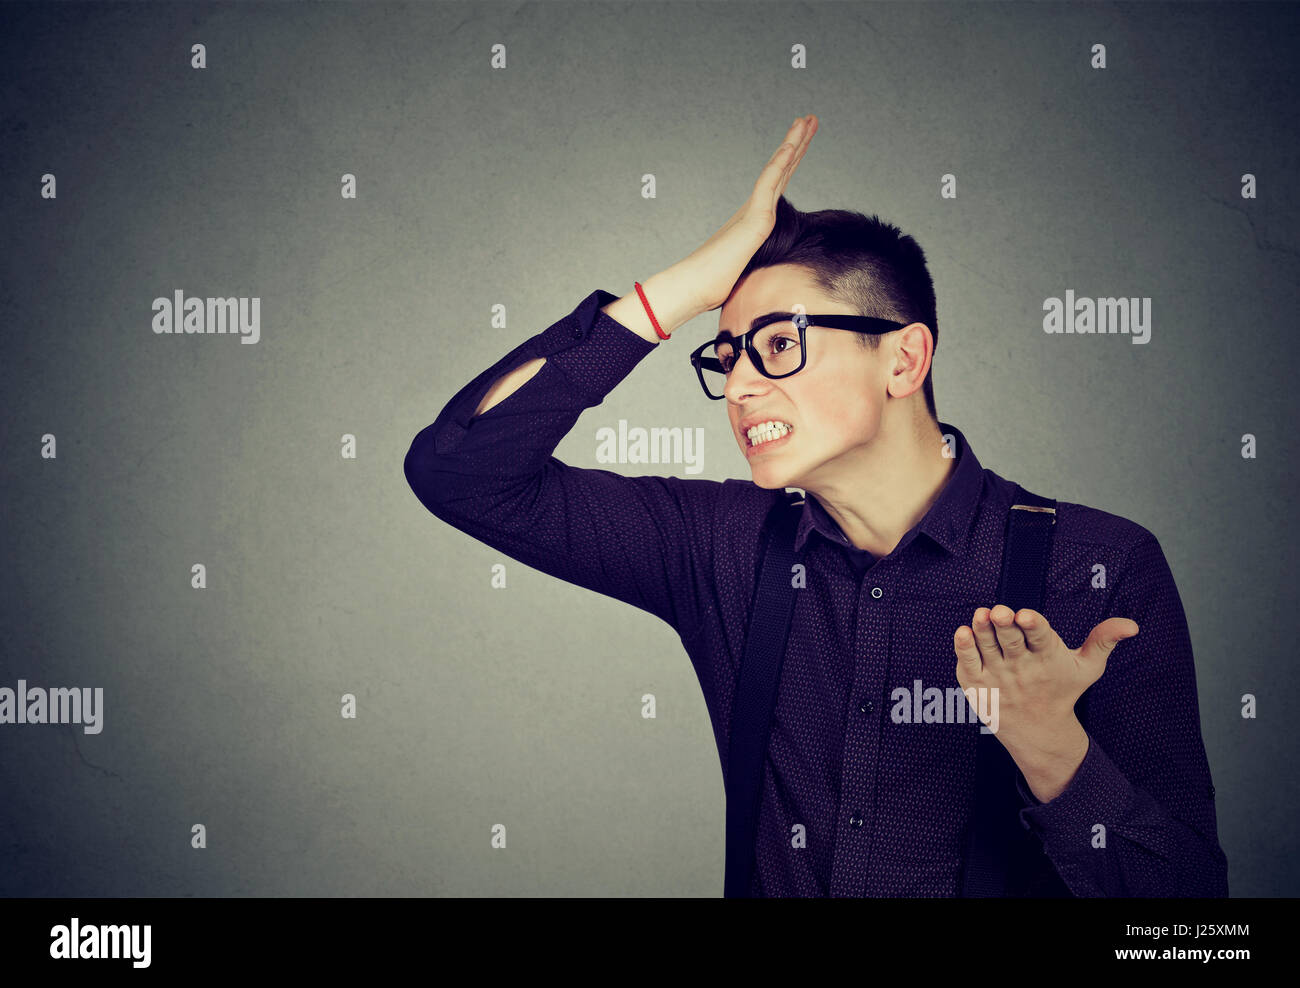 Regrets wrong doing. Silly young man, slapping hand on head having duh moment isolated on gray background. Human emotion facial expression feelings an Stock Photo